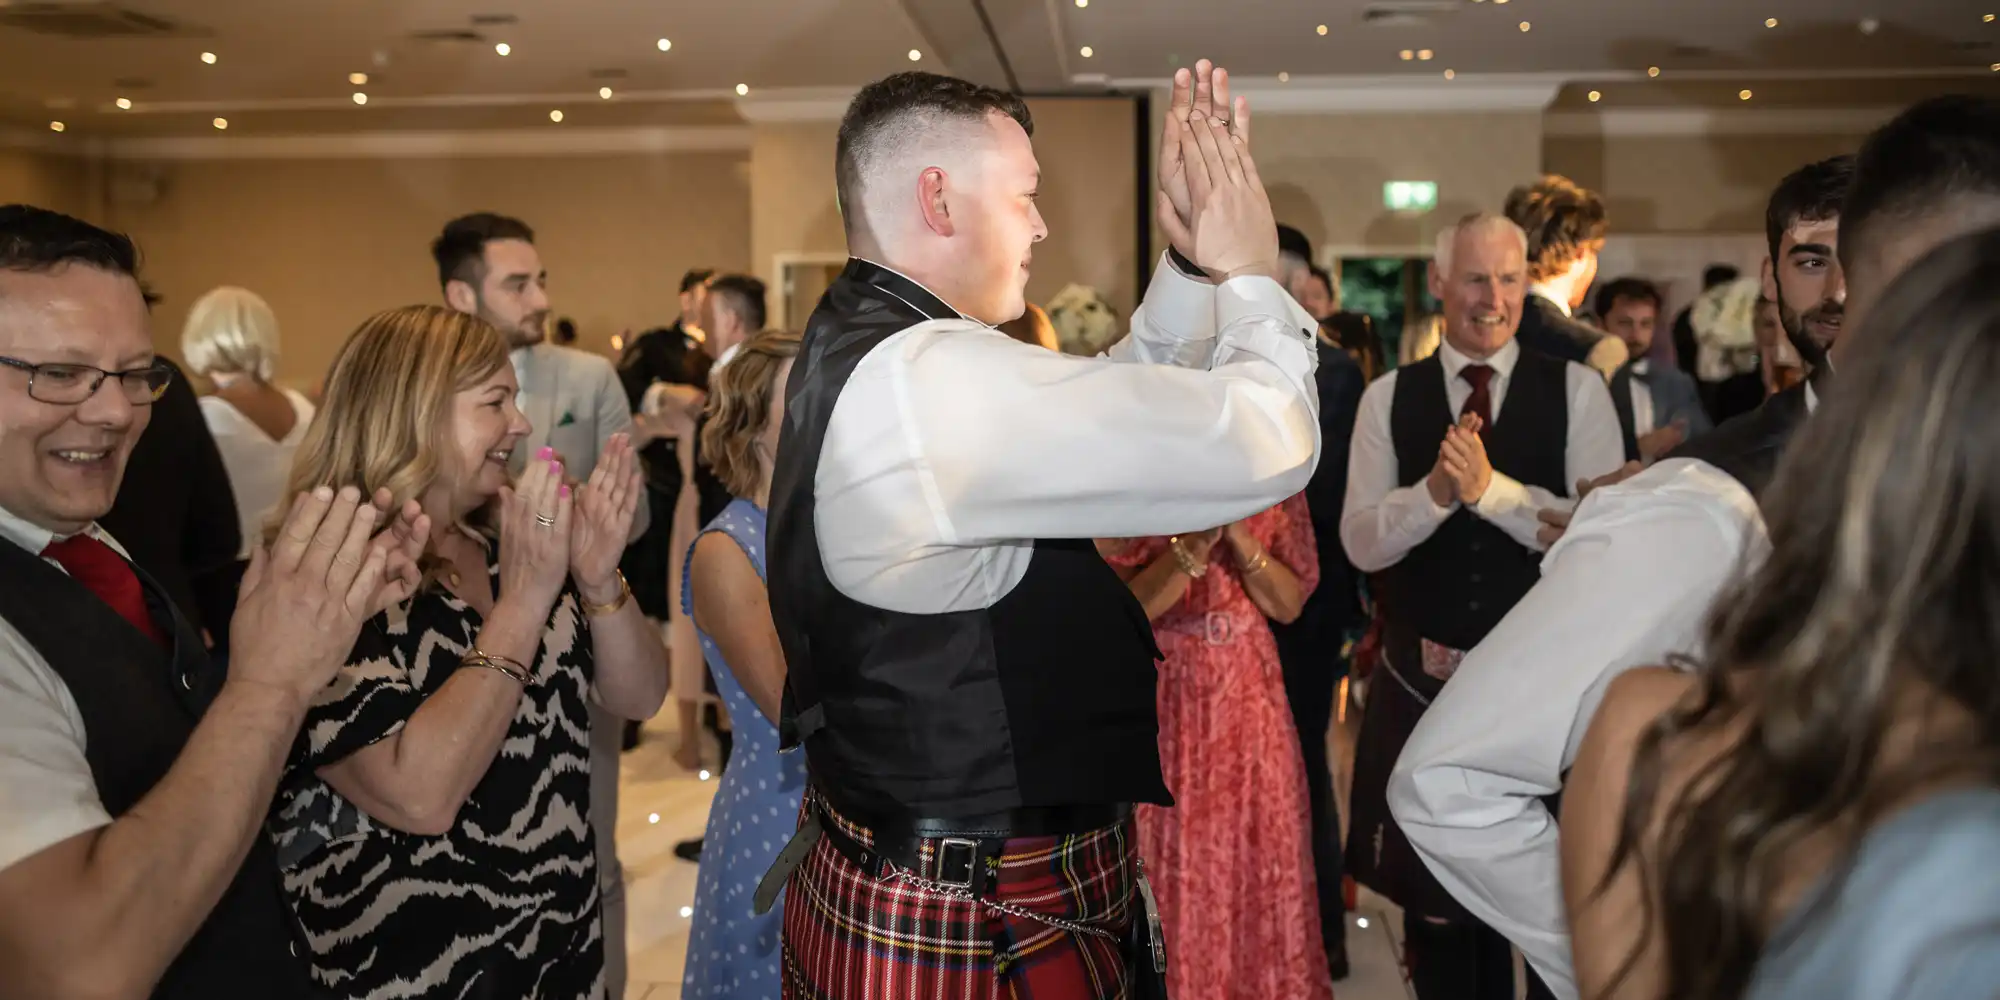 A man in a kilt high-fives another man as people around them clap and celebrate at an indoor event.